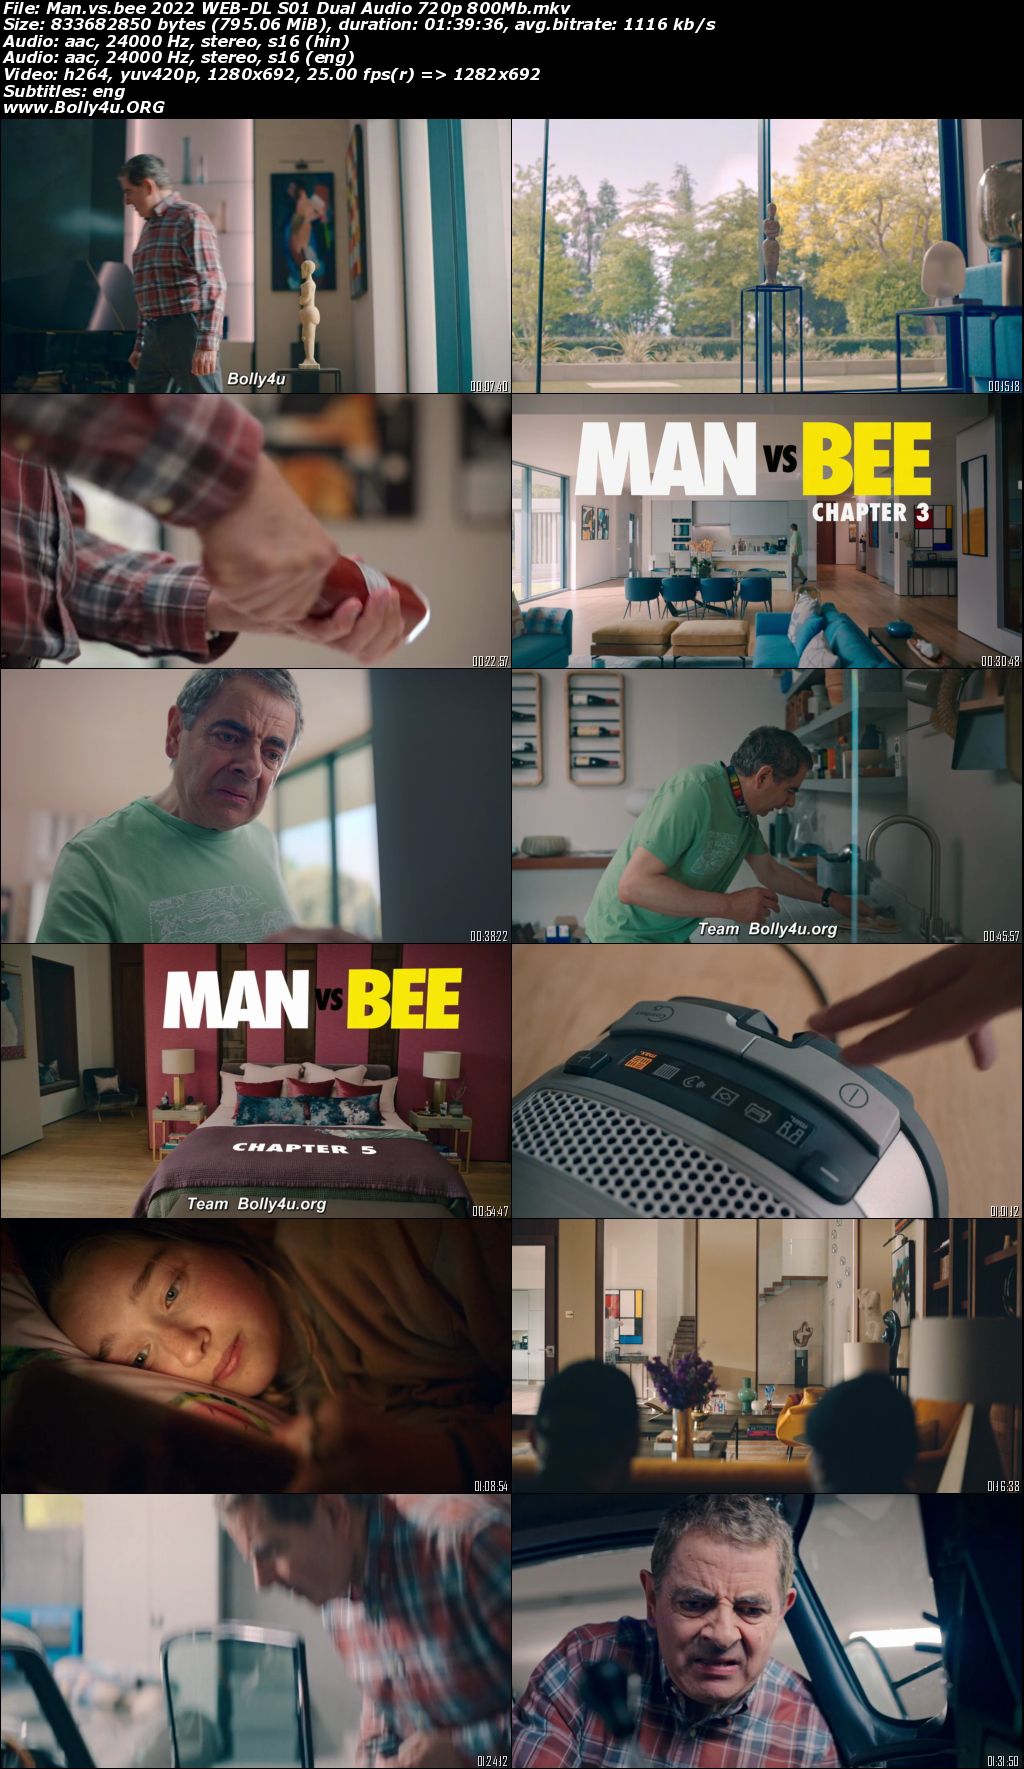 Man VS Bee 2022 WEB-DL Hindi Dual Audio S01 Complete Download